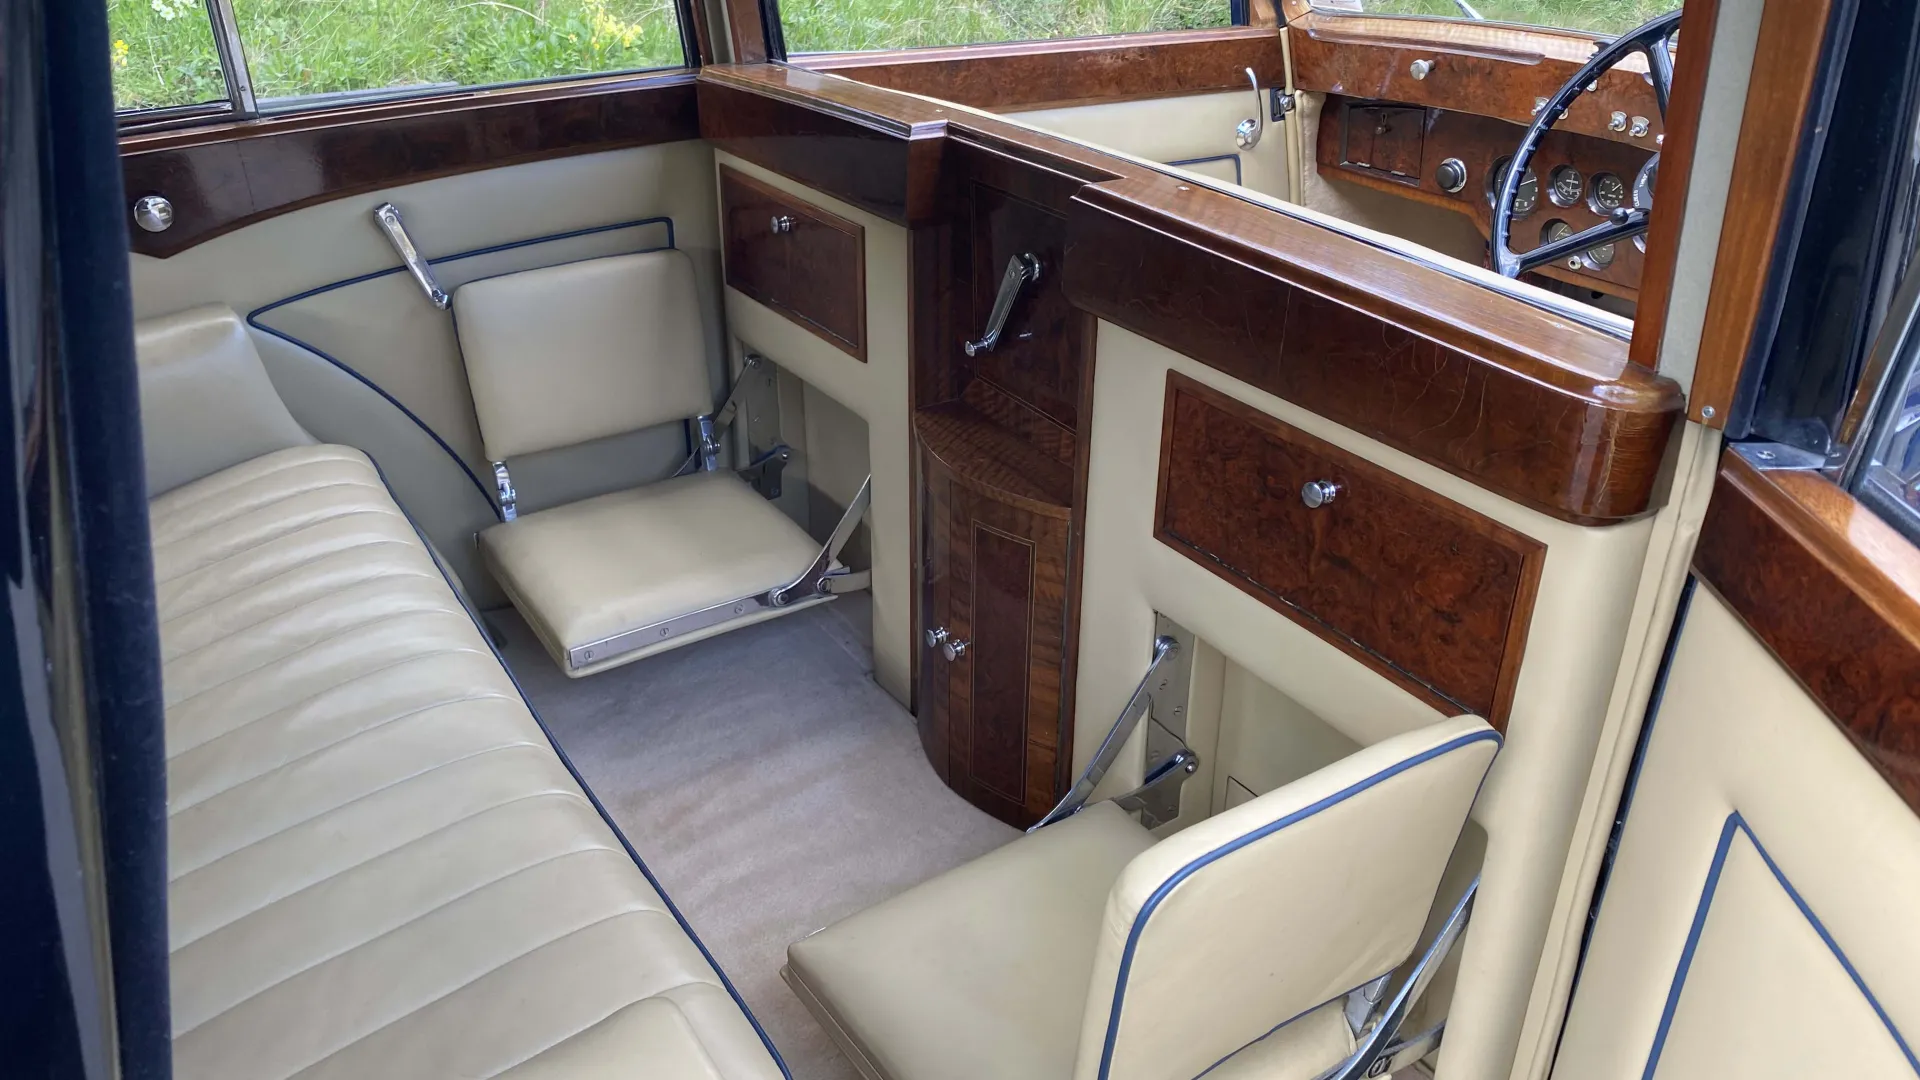 inside rear cabine of Rolls-Royce Sedanca de Ville showing cream leather leather interior and wood inside the vehicle